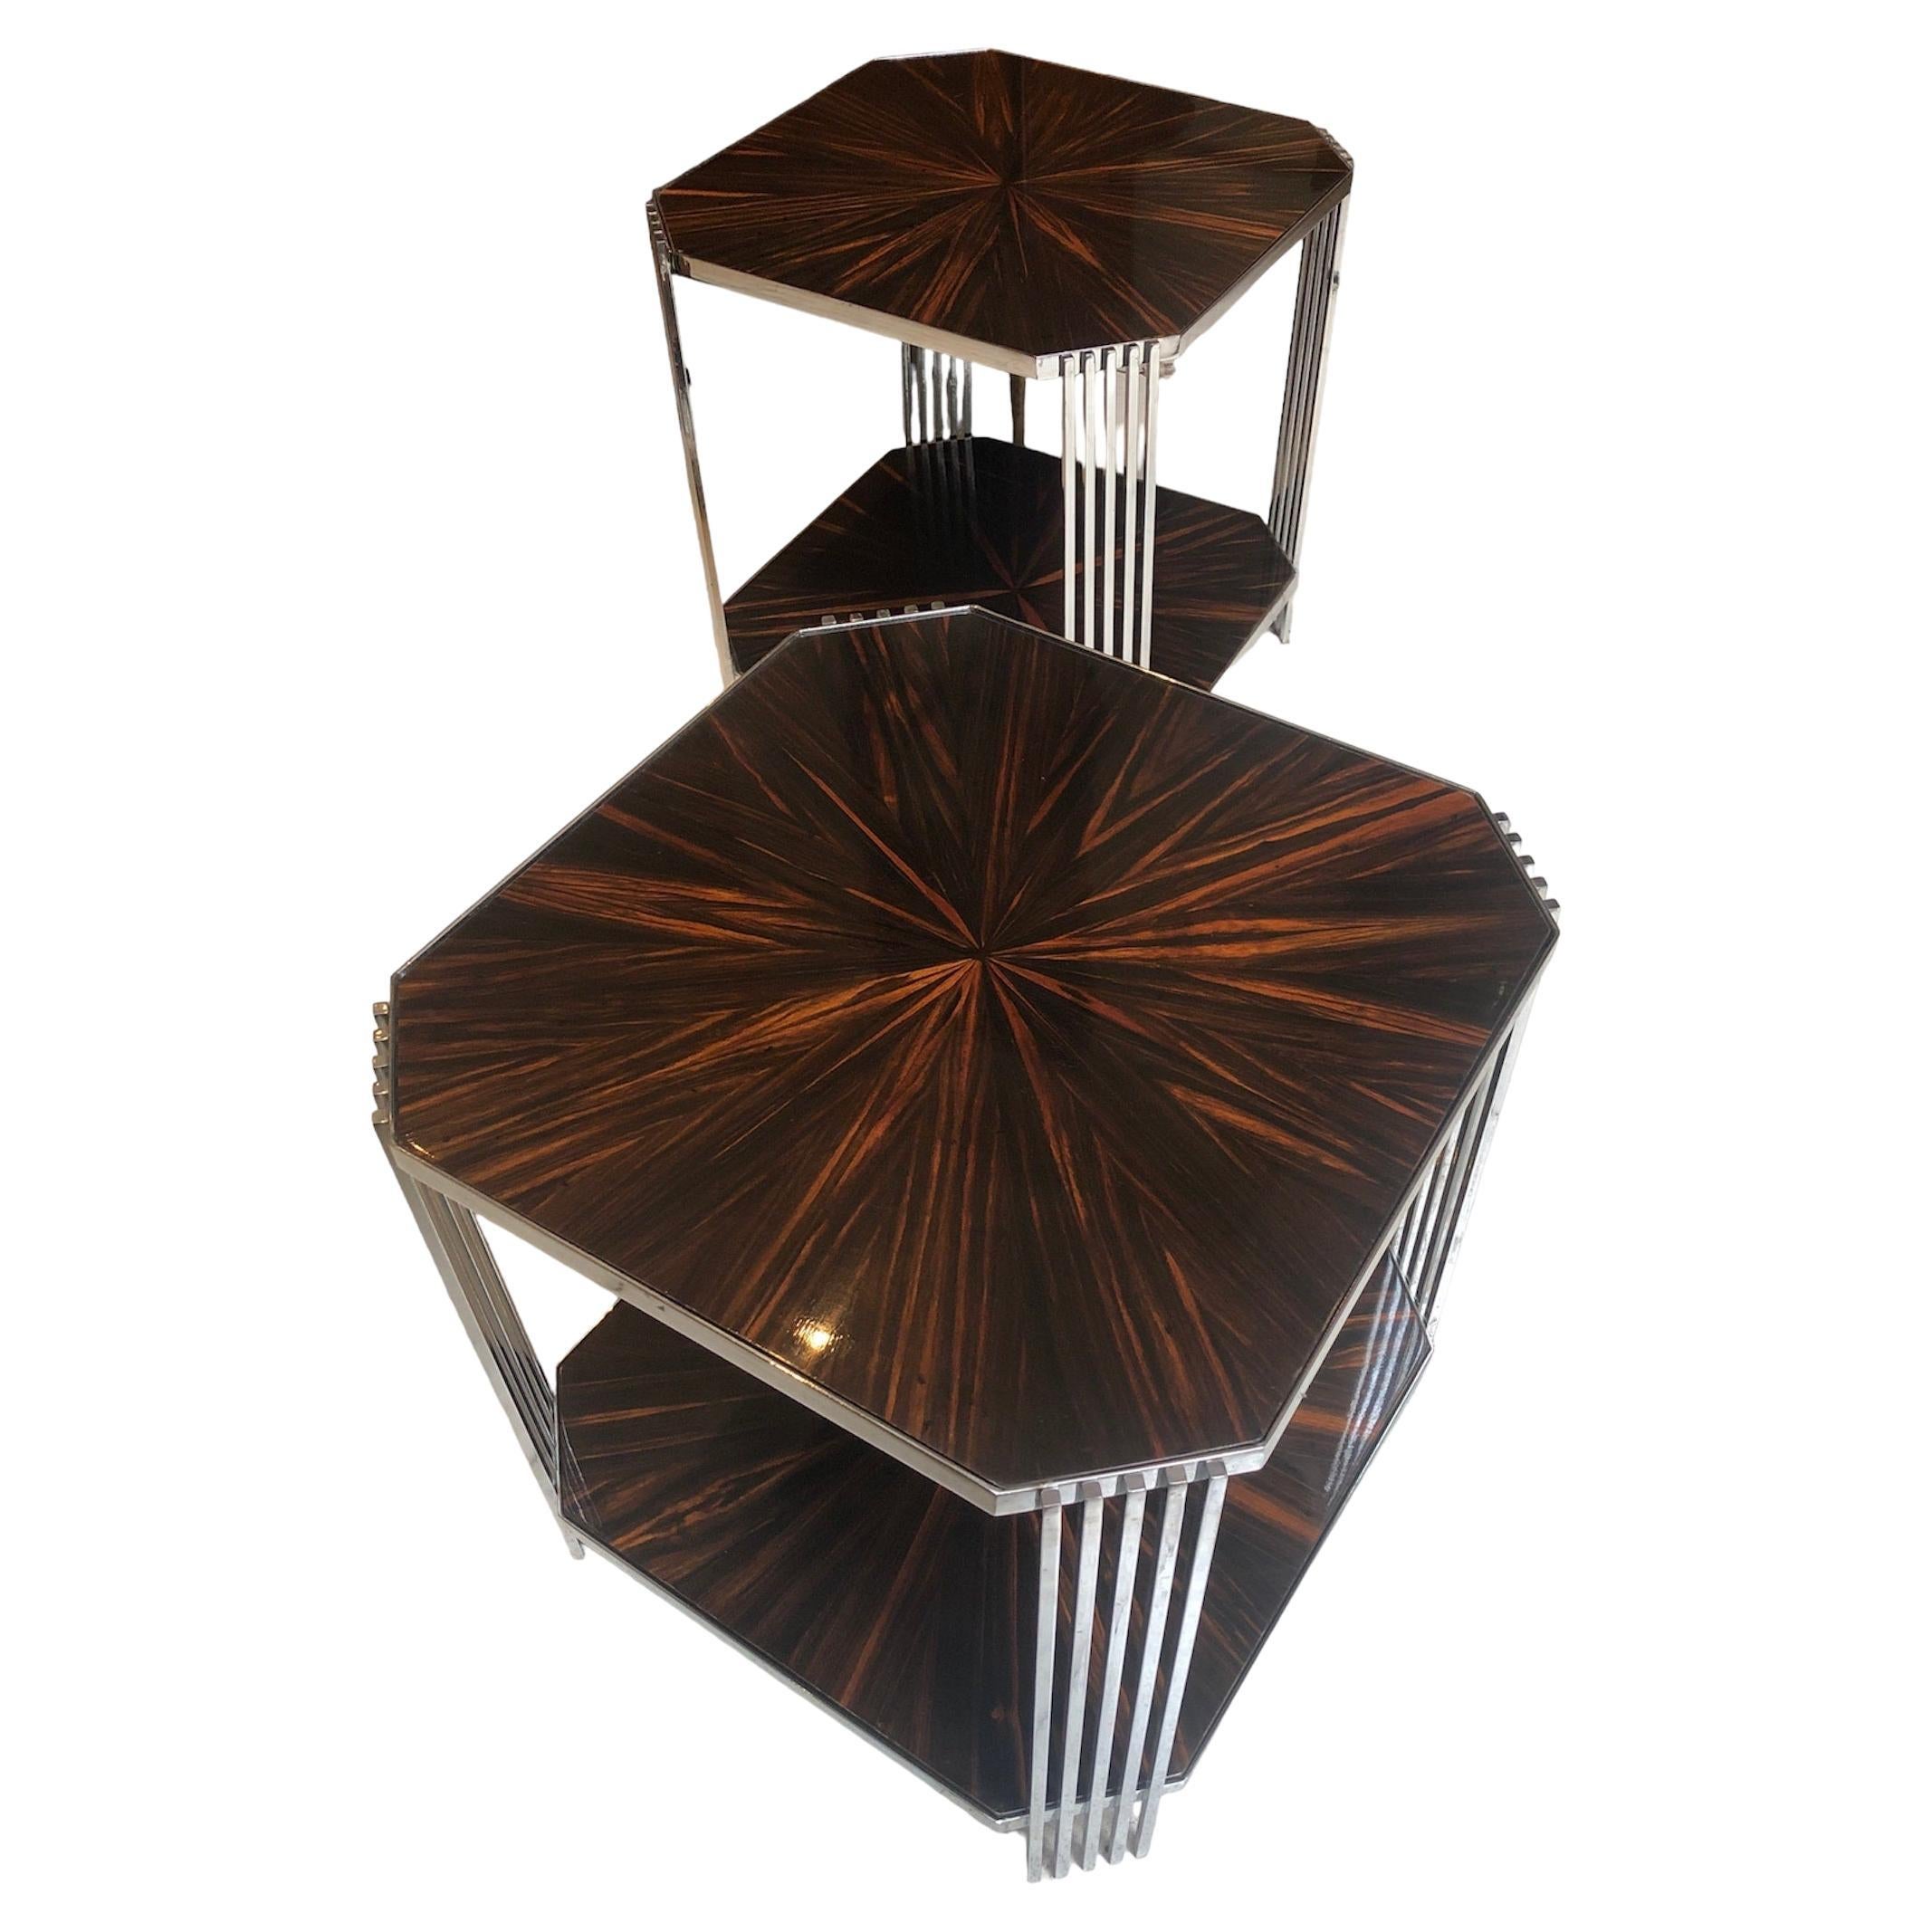 Amaizing Pair of Tables, in Wood and Chrome, France, 1950 For Sale